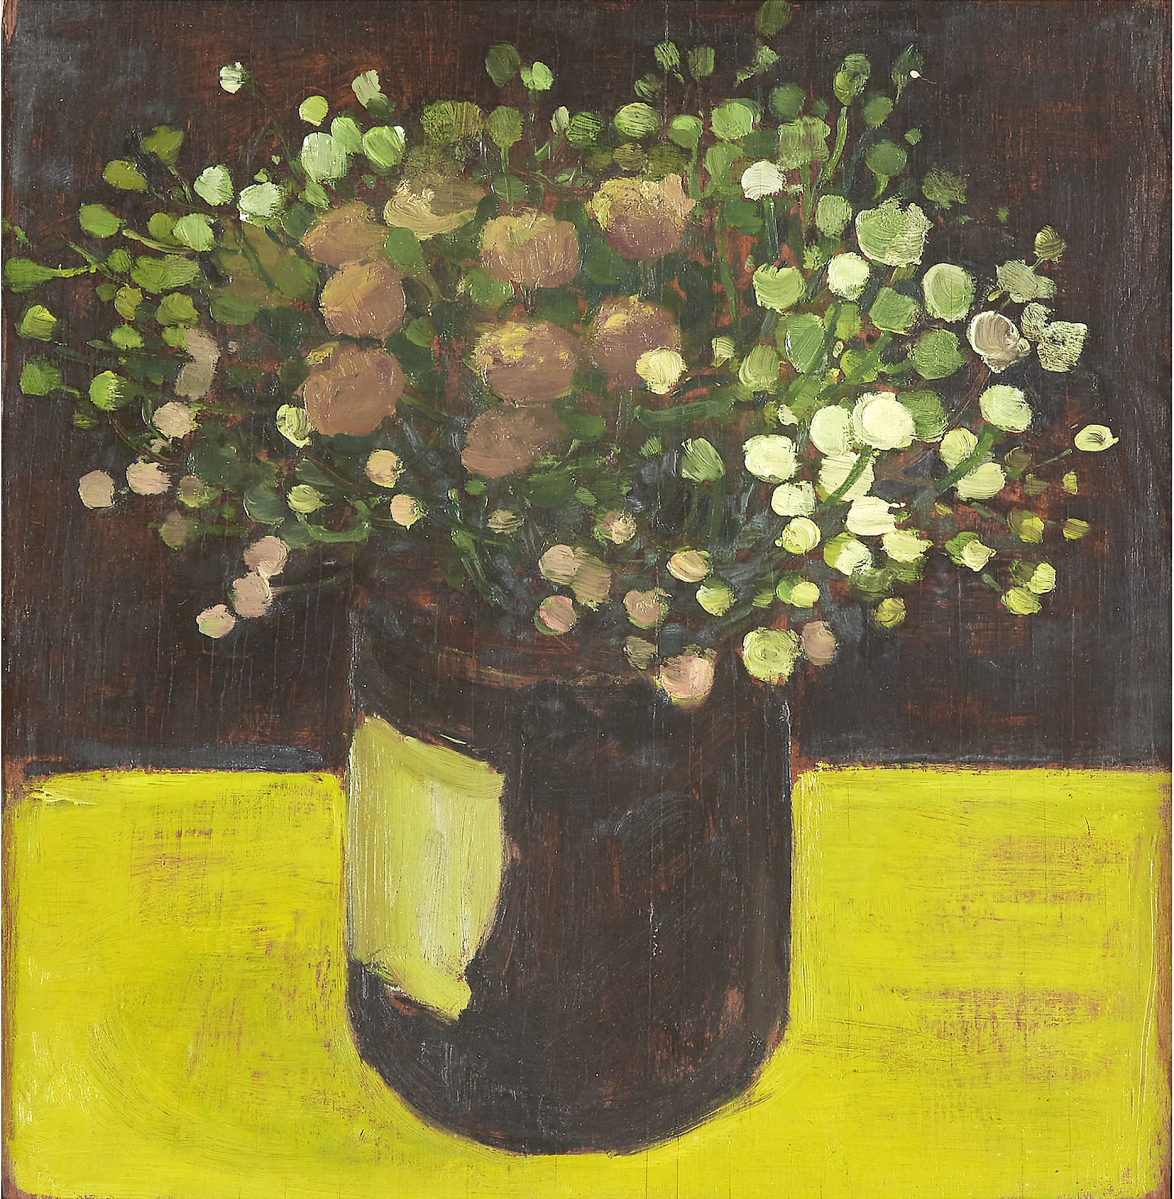 Albert York’s “Jar of Wildflowers” bloomed to $100,800. He created it in 1966 and it went on exhibition at Davis & Long Company in 1977. Oil on panel, 10-  by 10½ inches.